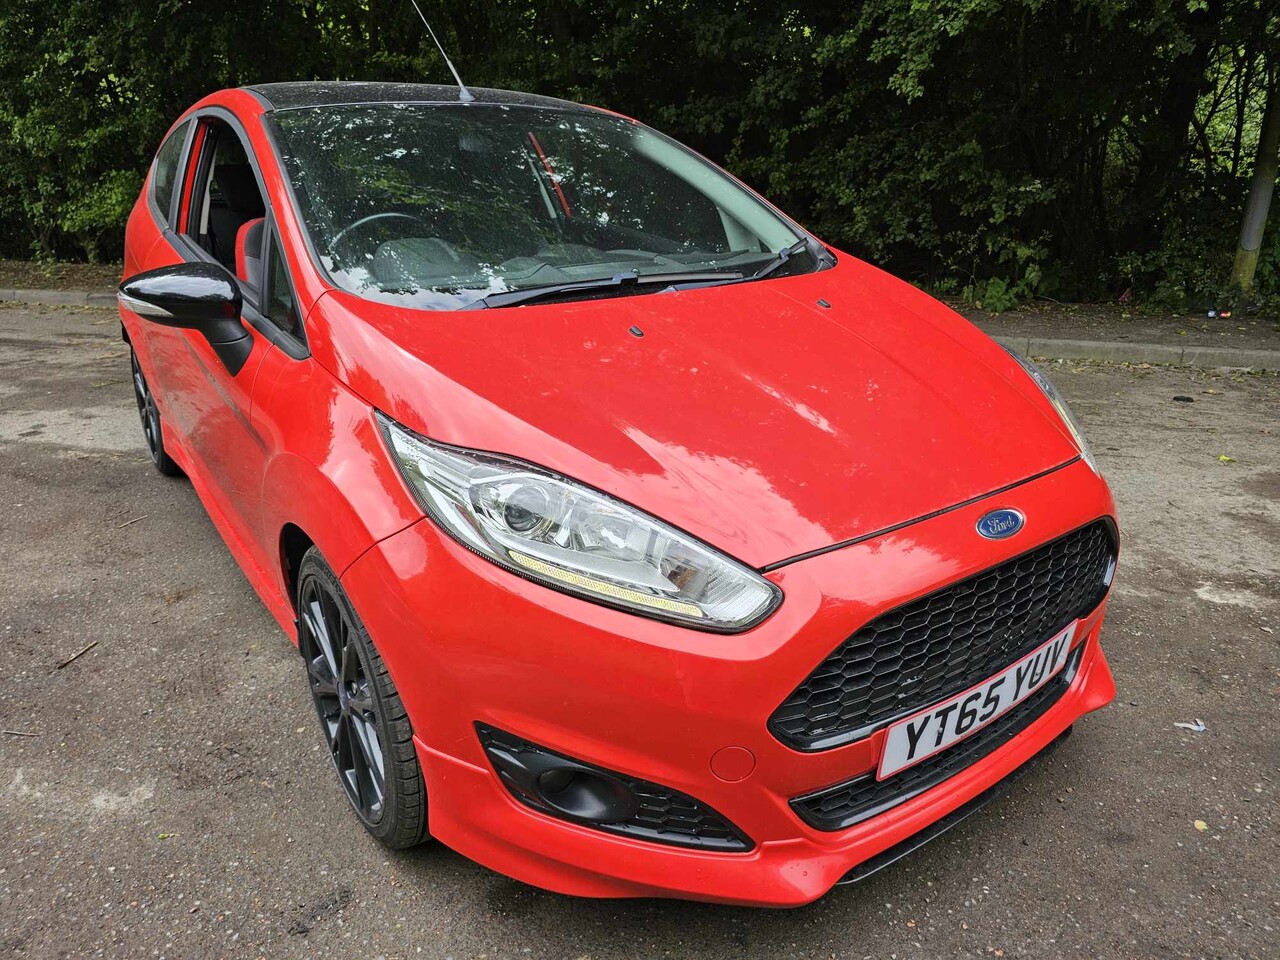 Ford Fiesta 1.0 Zetec S Red Edition 3dr